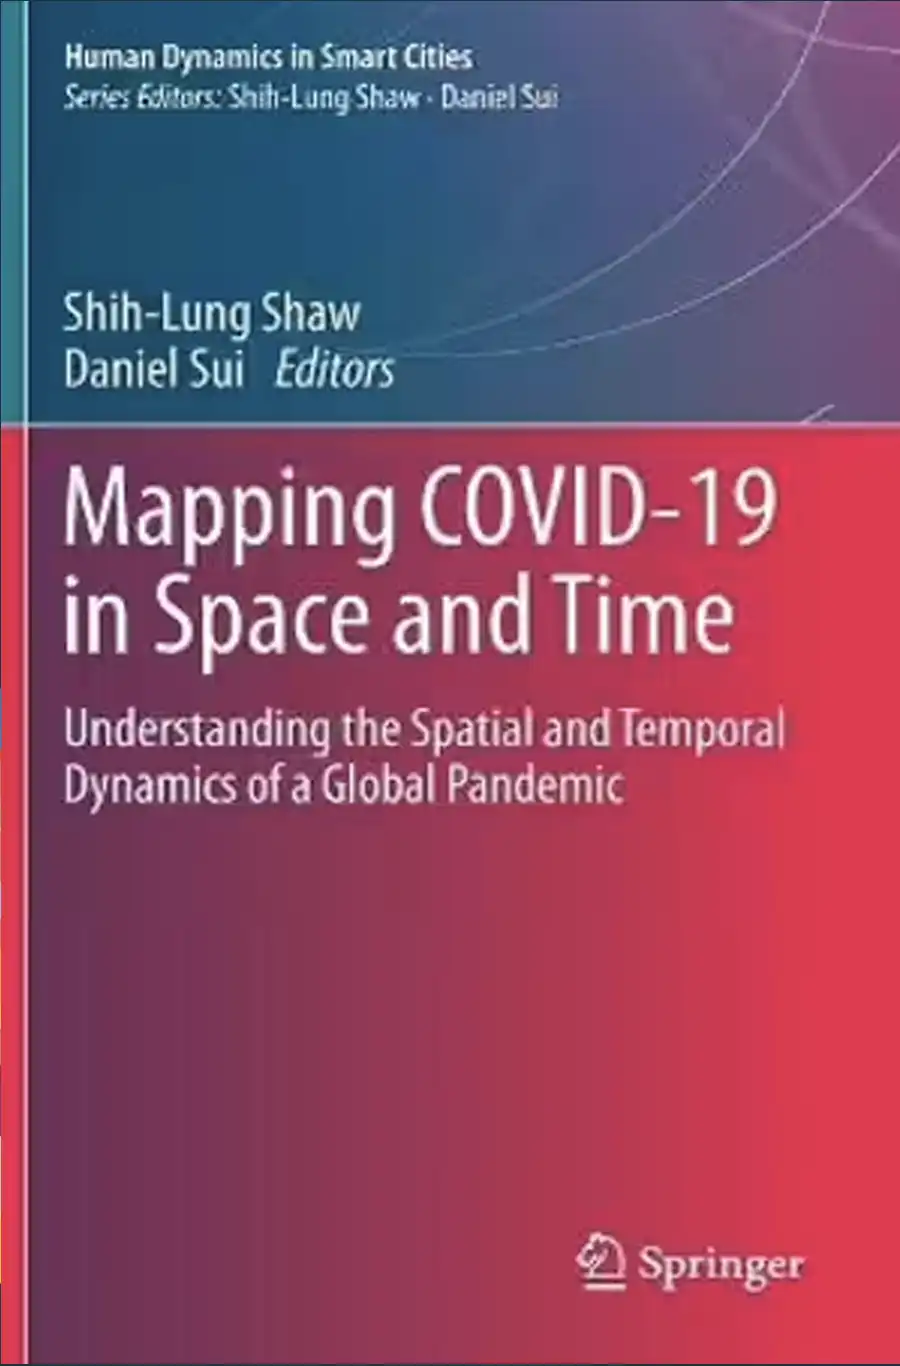 Book jacket for Mapping COVID-19 in Space and Time